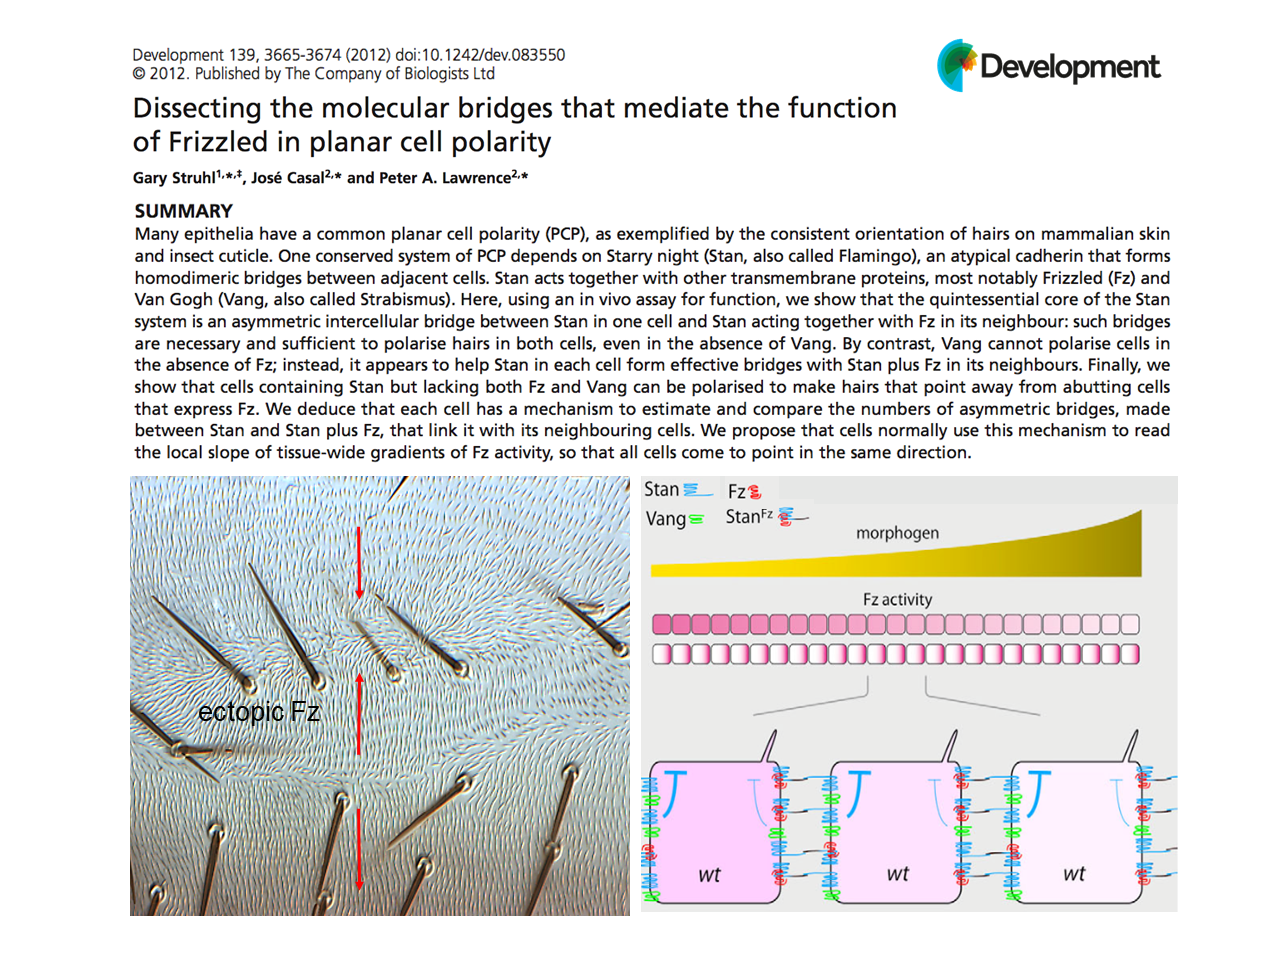 Dissecting the molecular bridges that mediate the function of Frizzled in planar cell polarity